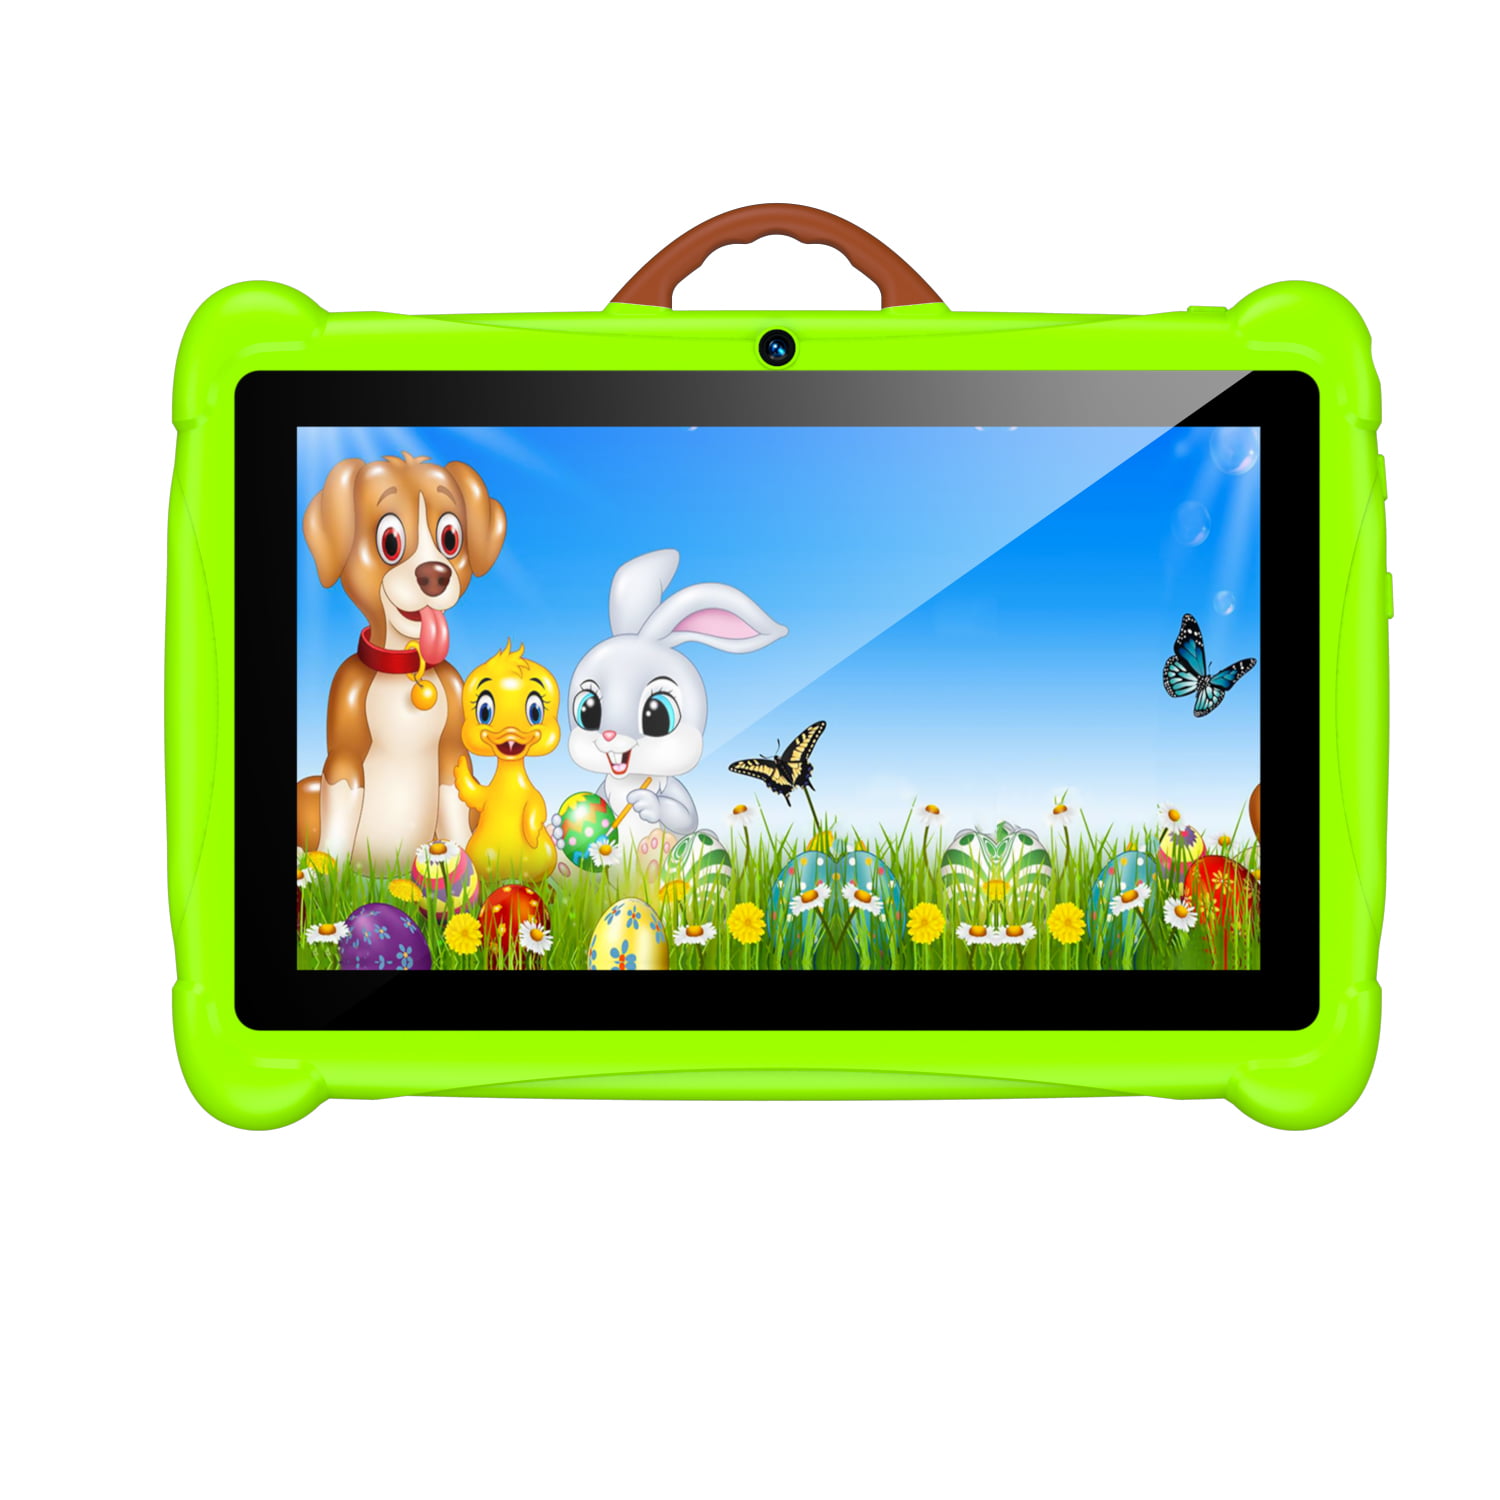 Buy Modio M2 Kids Tablet 7 Inch Hd Display With Dual Camera 3g Ram And